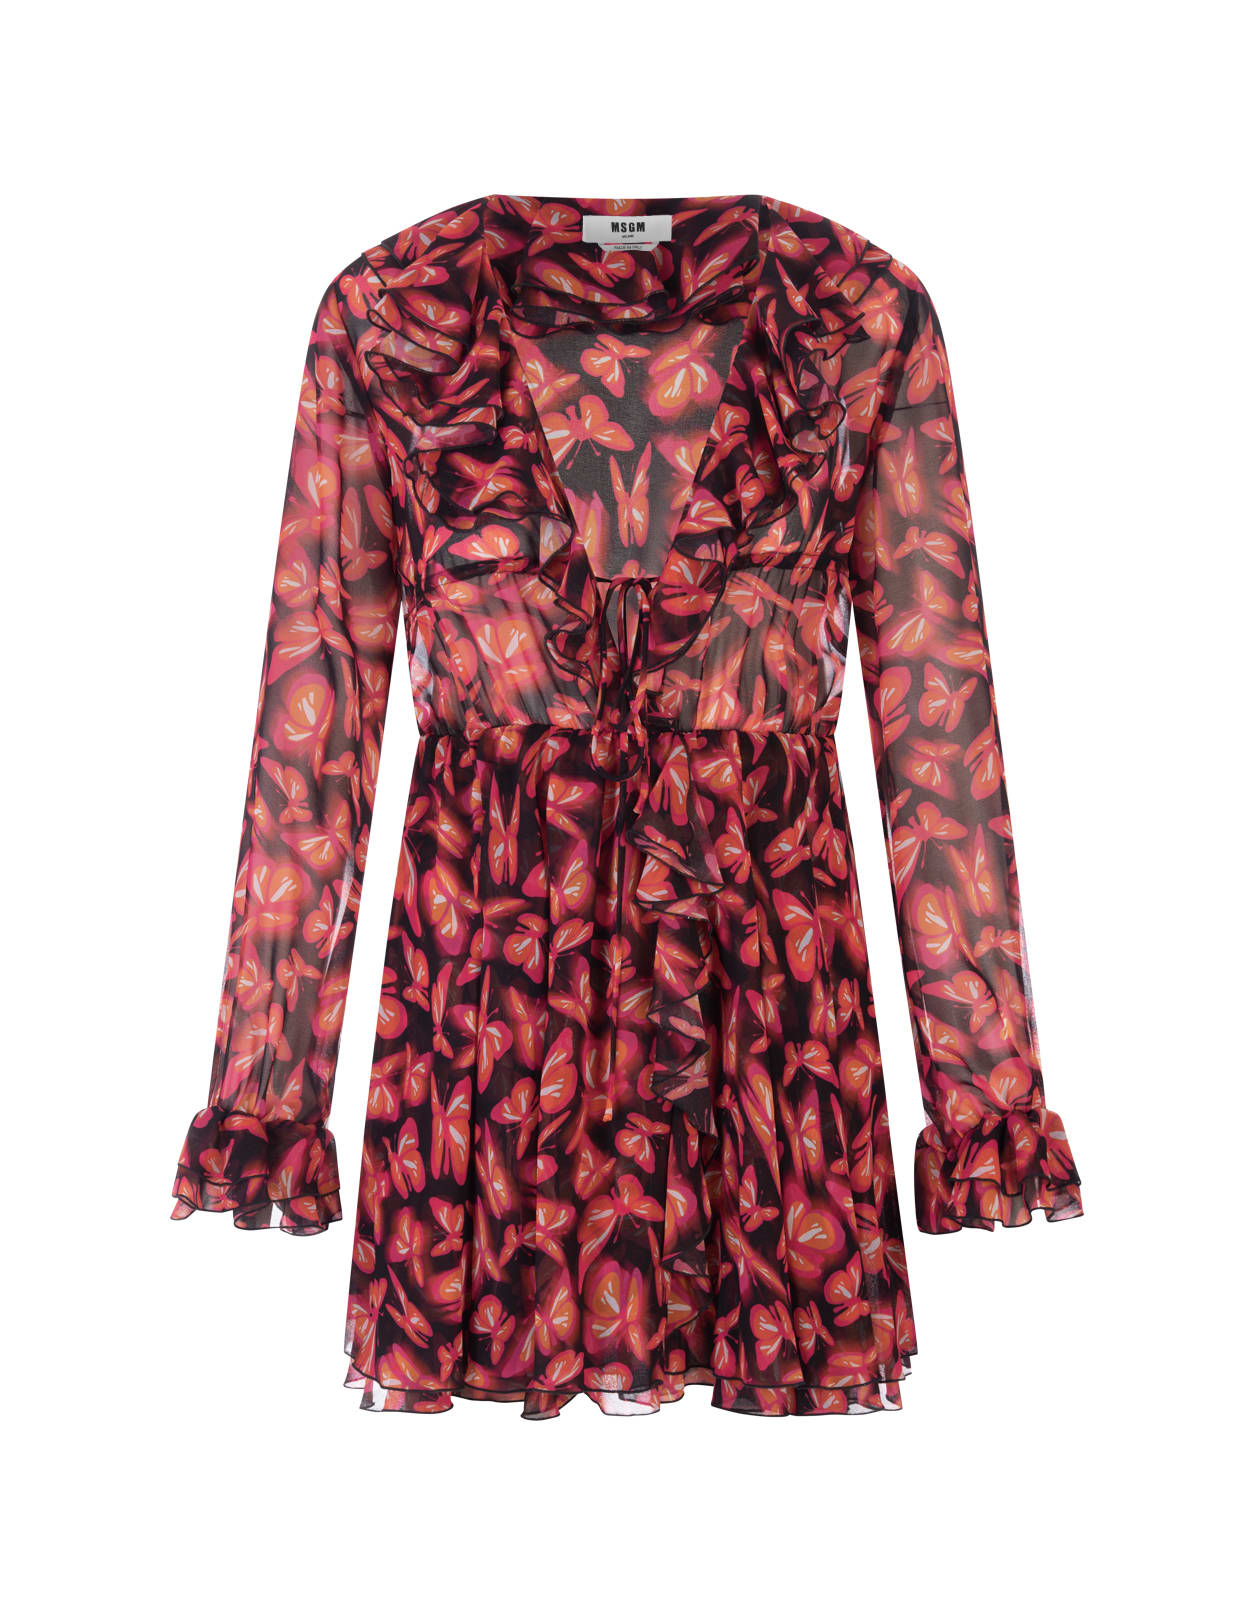 MSGM Short Black Dress With Red Butterflies Print